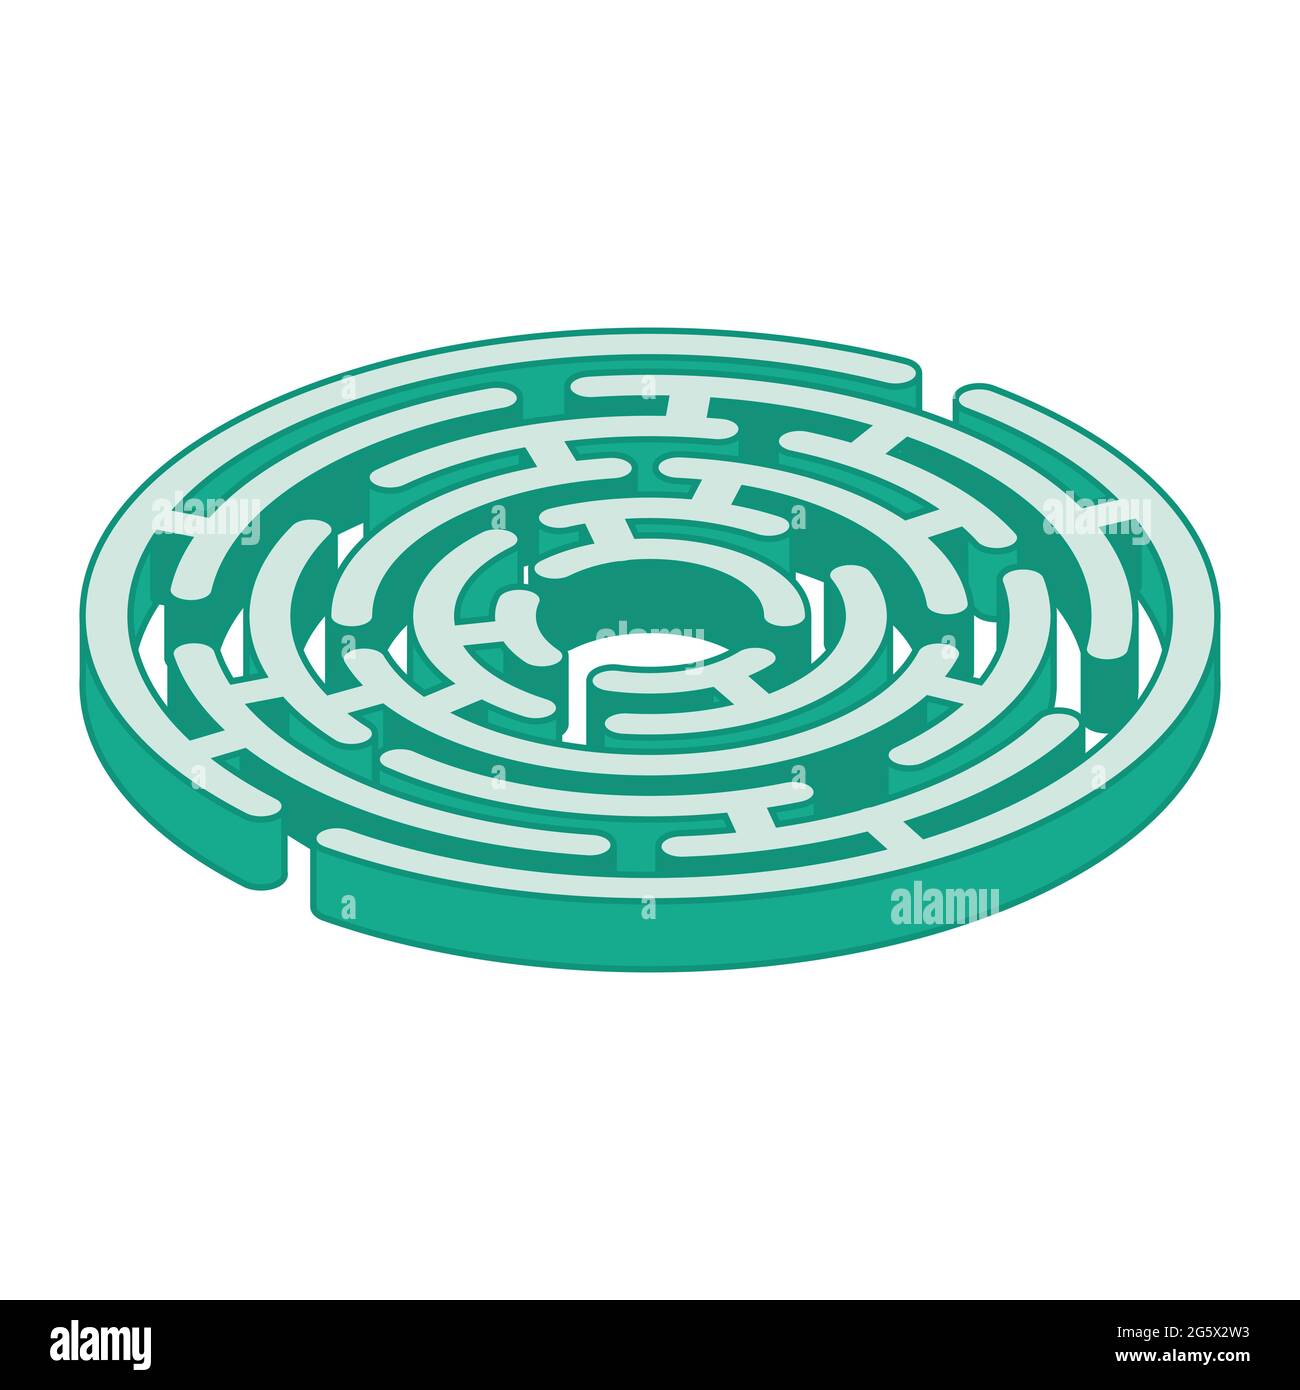 Circle Isometric Labyrinth Isolated on White Background. Outline Maze. Fun Logic Game with Riddle. Vector Illustration. Stock Vector